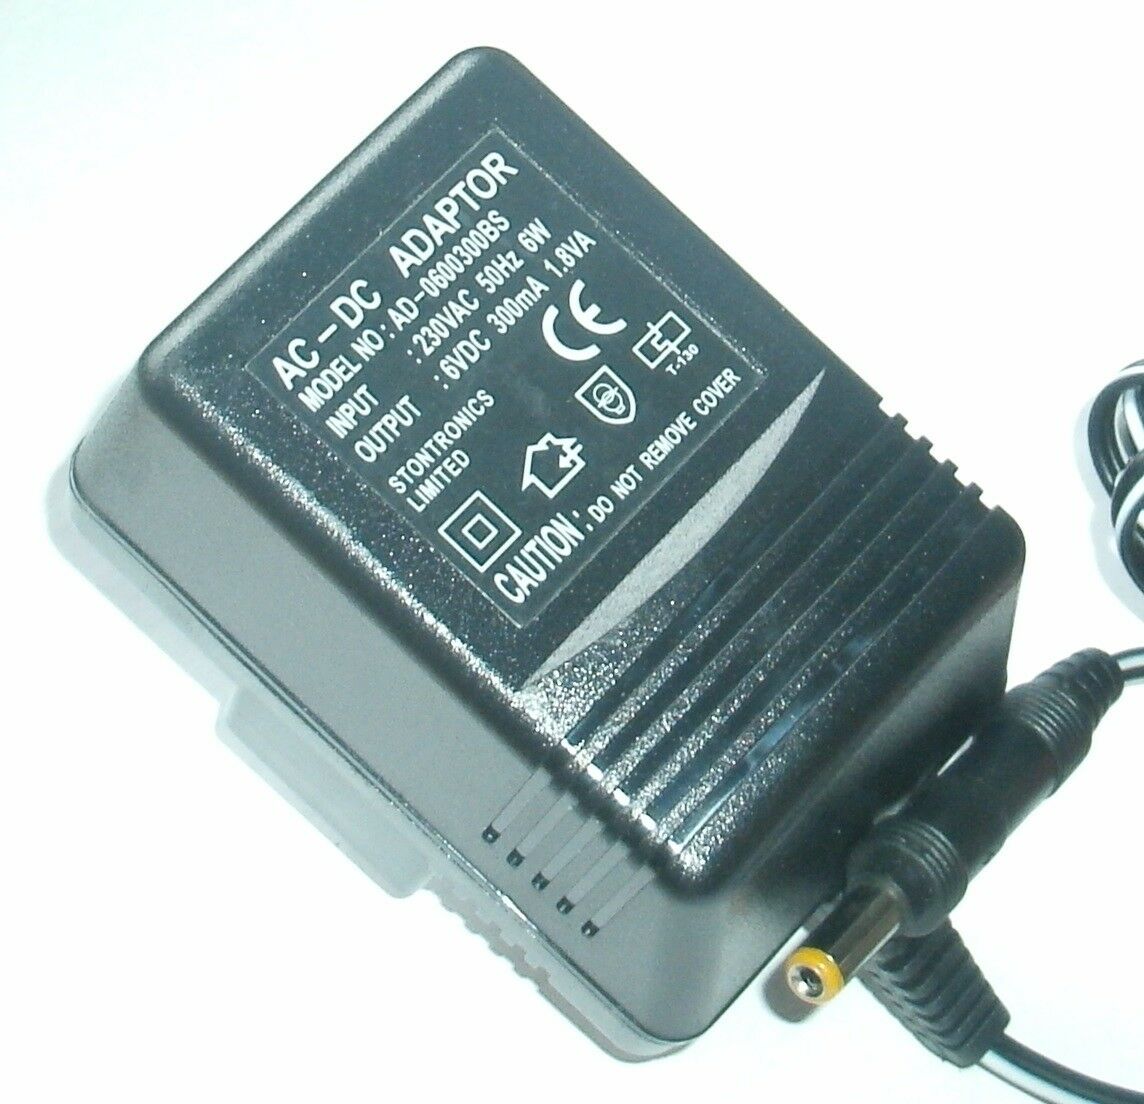 New DC6V 300mA AD-0600300BS Power Supply AC ADAPTER